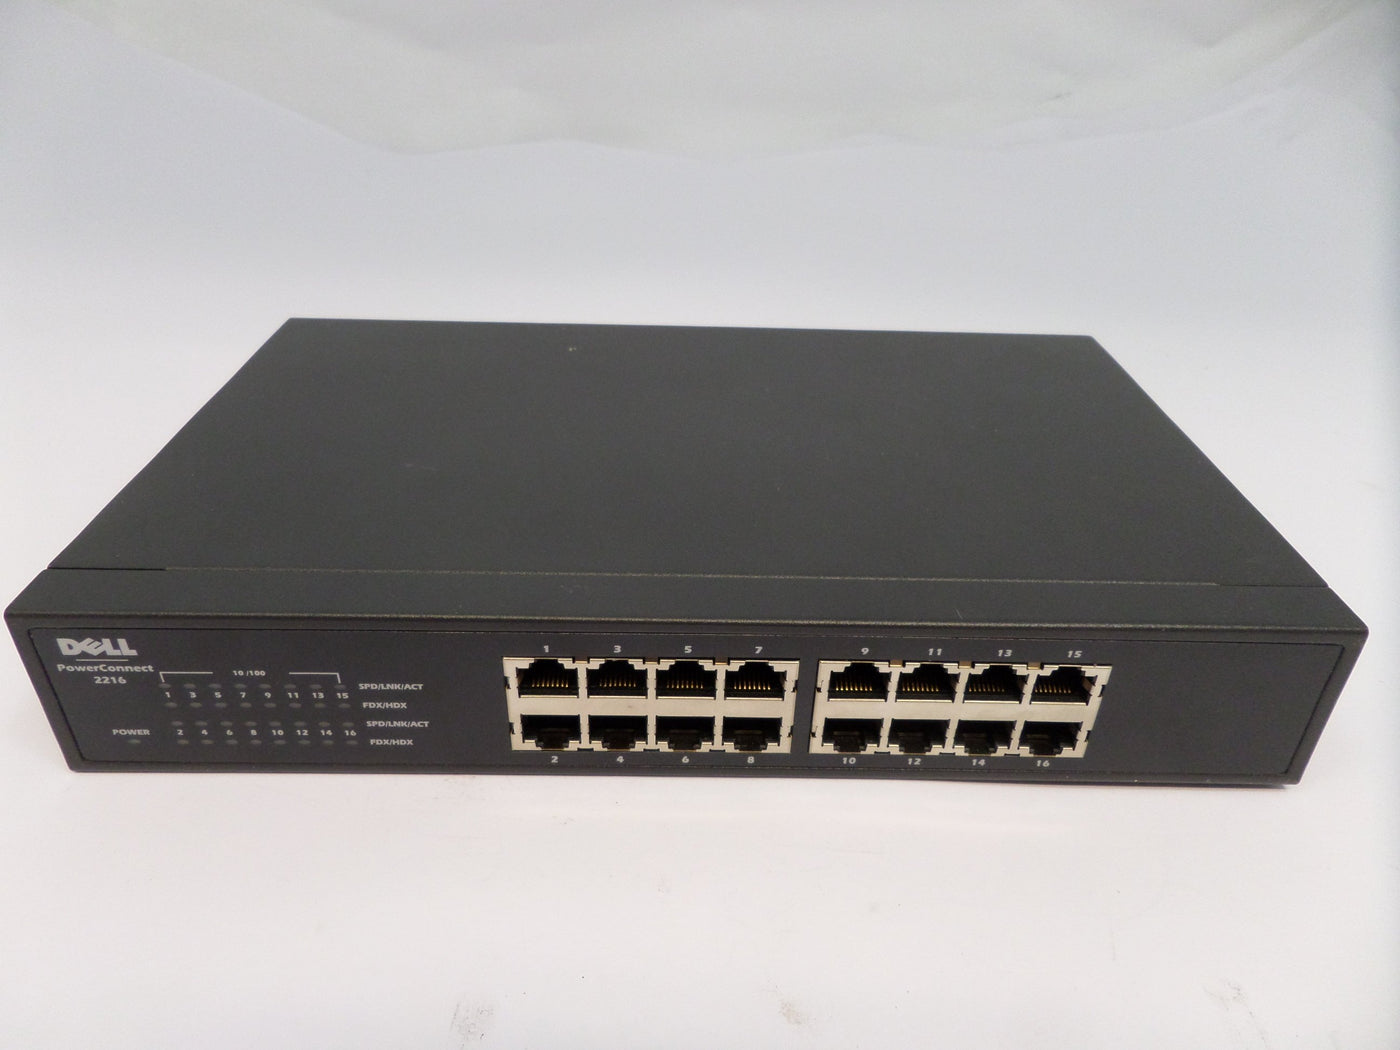 0WJ756 - Dell PowerConnect 2216 16-Port Unmanaged Fast Ethernet Switch - Refurbished